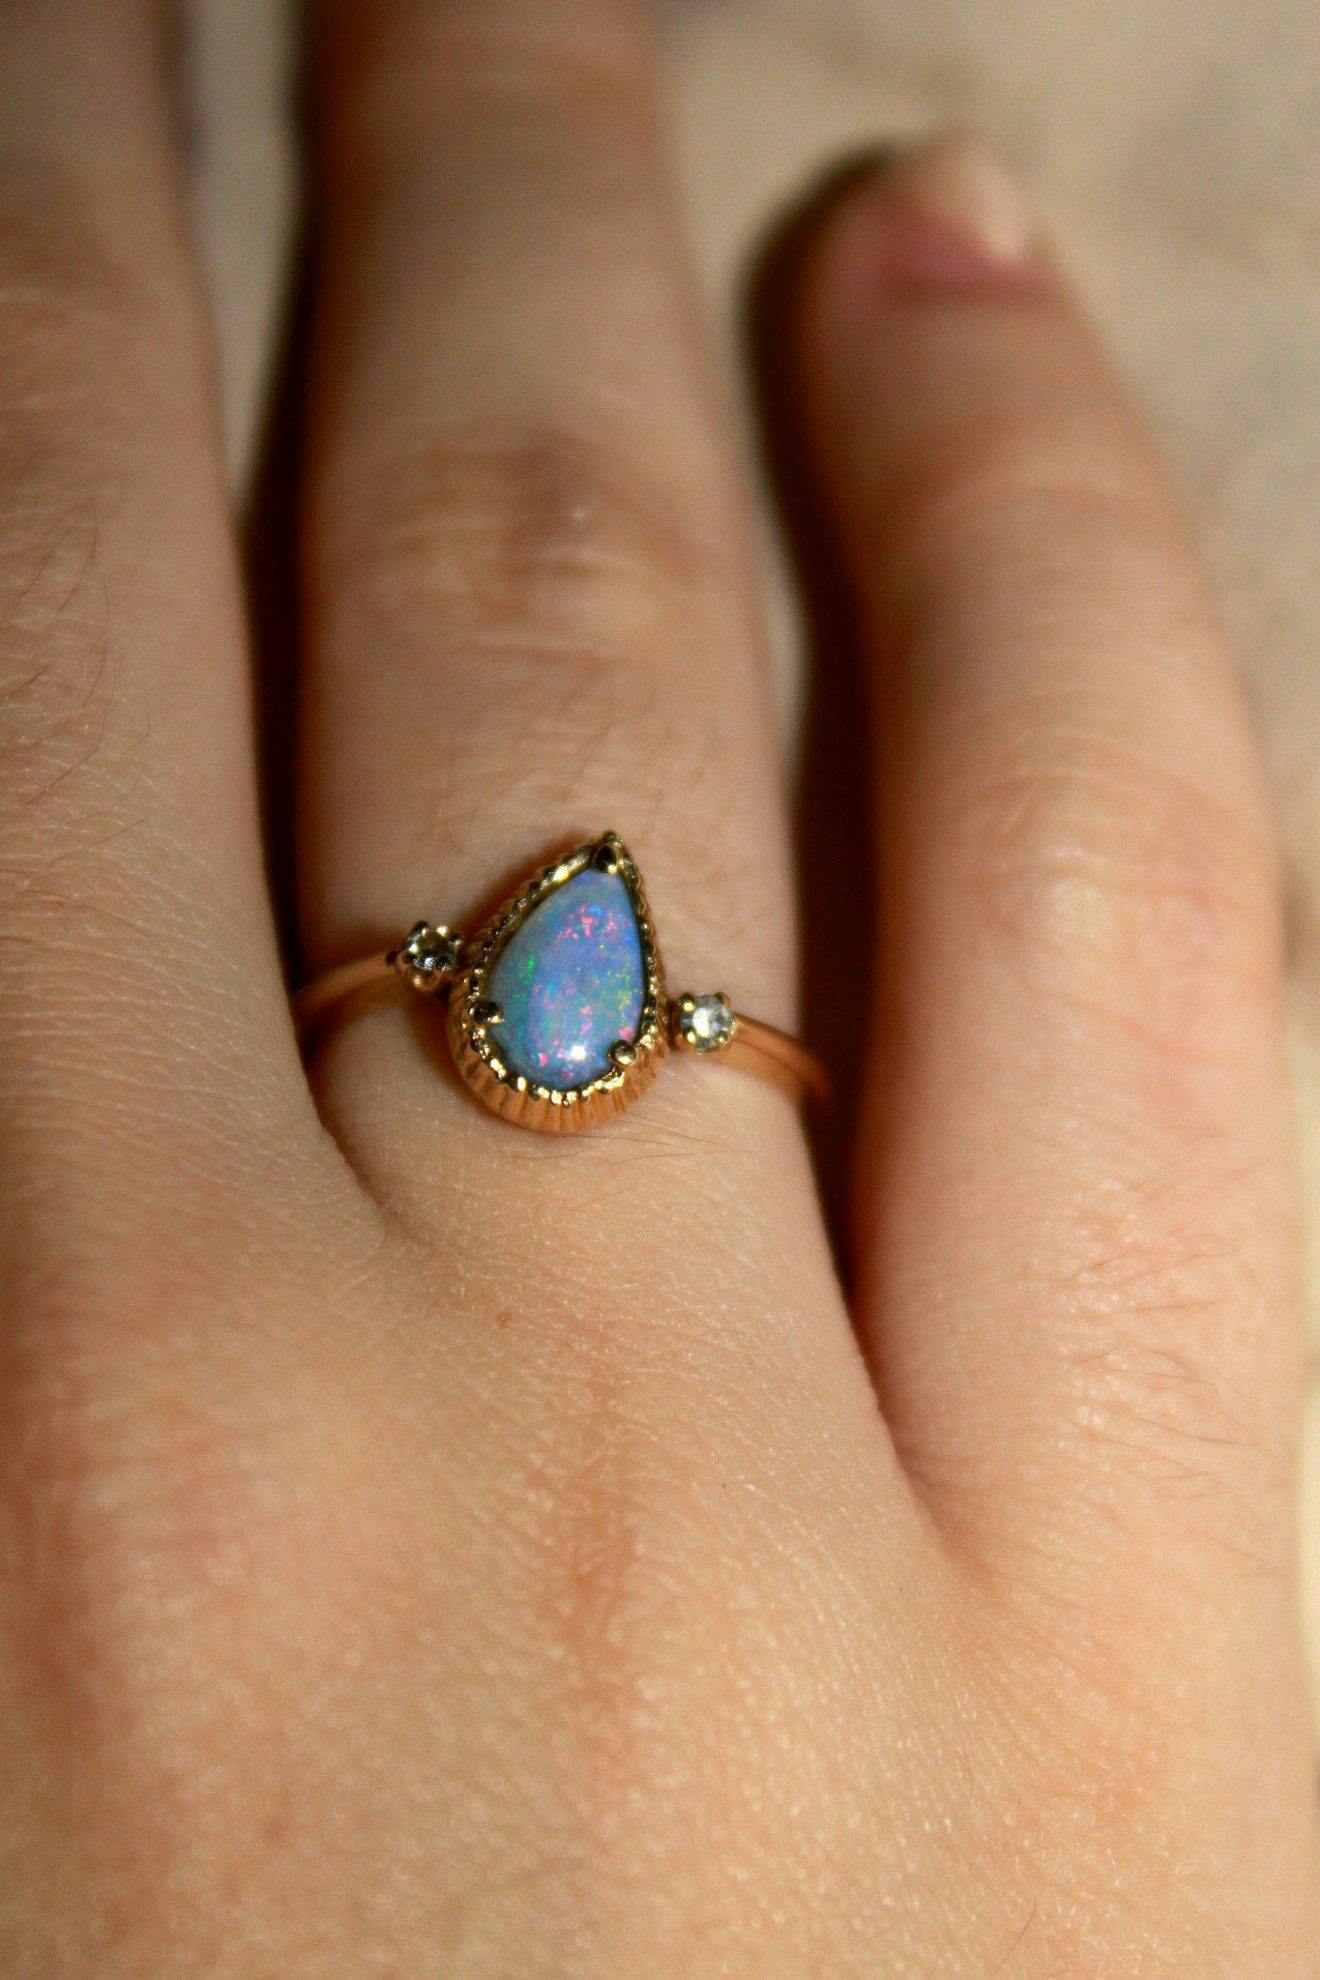 bezel-set opal ring with raised prongs - protective gem settings